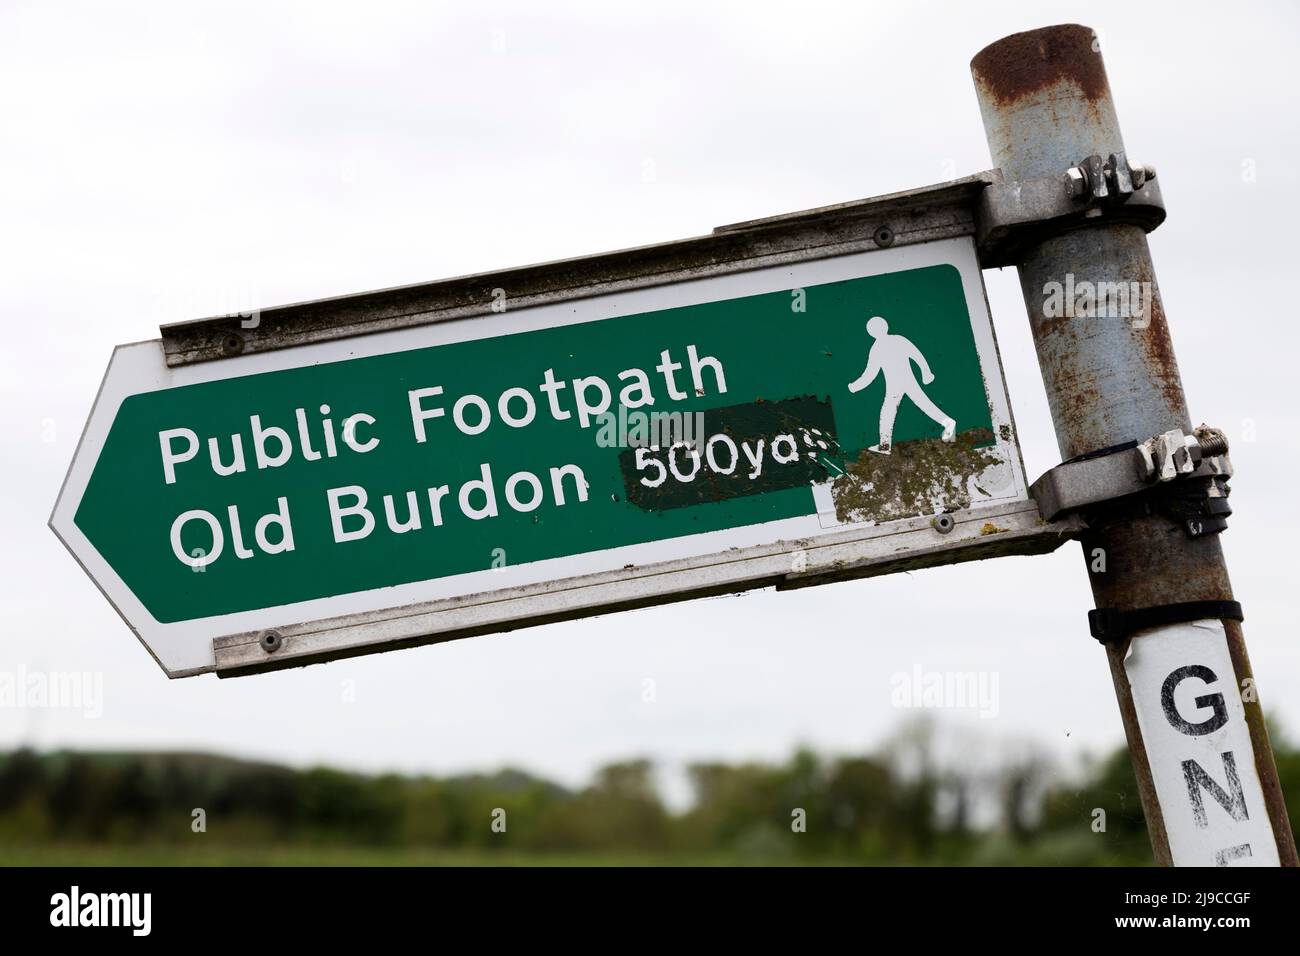 Sign pointing towards Old Burdon Village in Sunderland, England. The sign indicates that walkers should follow the footpath for 500 yards. Stock Photo